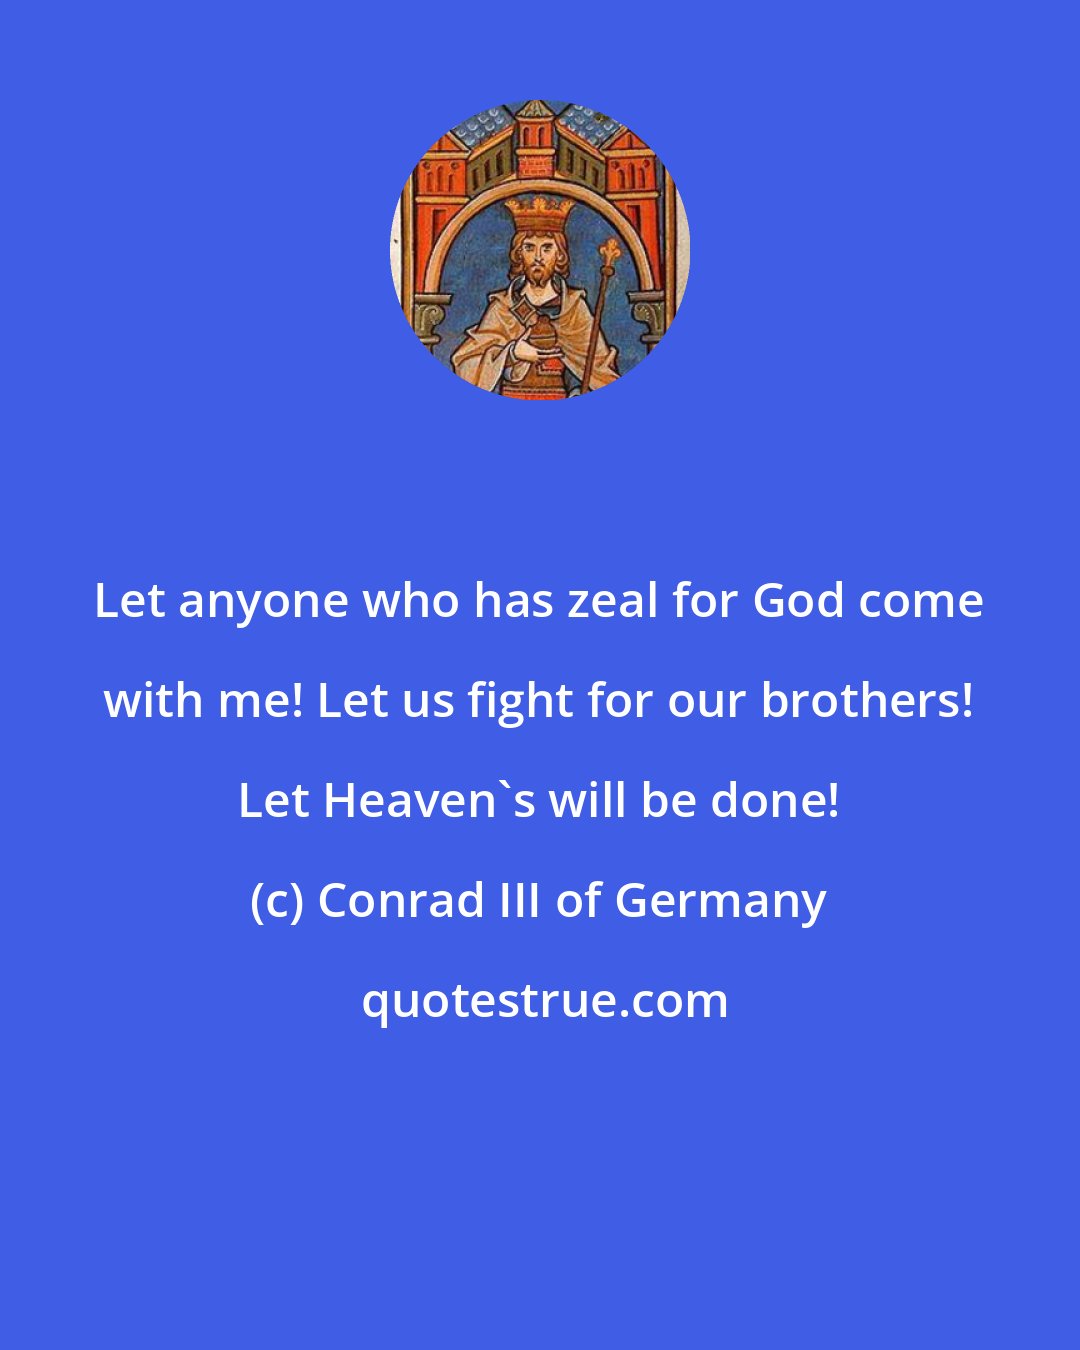 Conrad III of Germany: Let anyone who has zeal for God come with me! Let us fight for our brothers! Let Heaven's will be done!